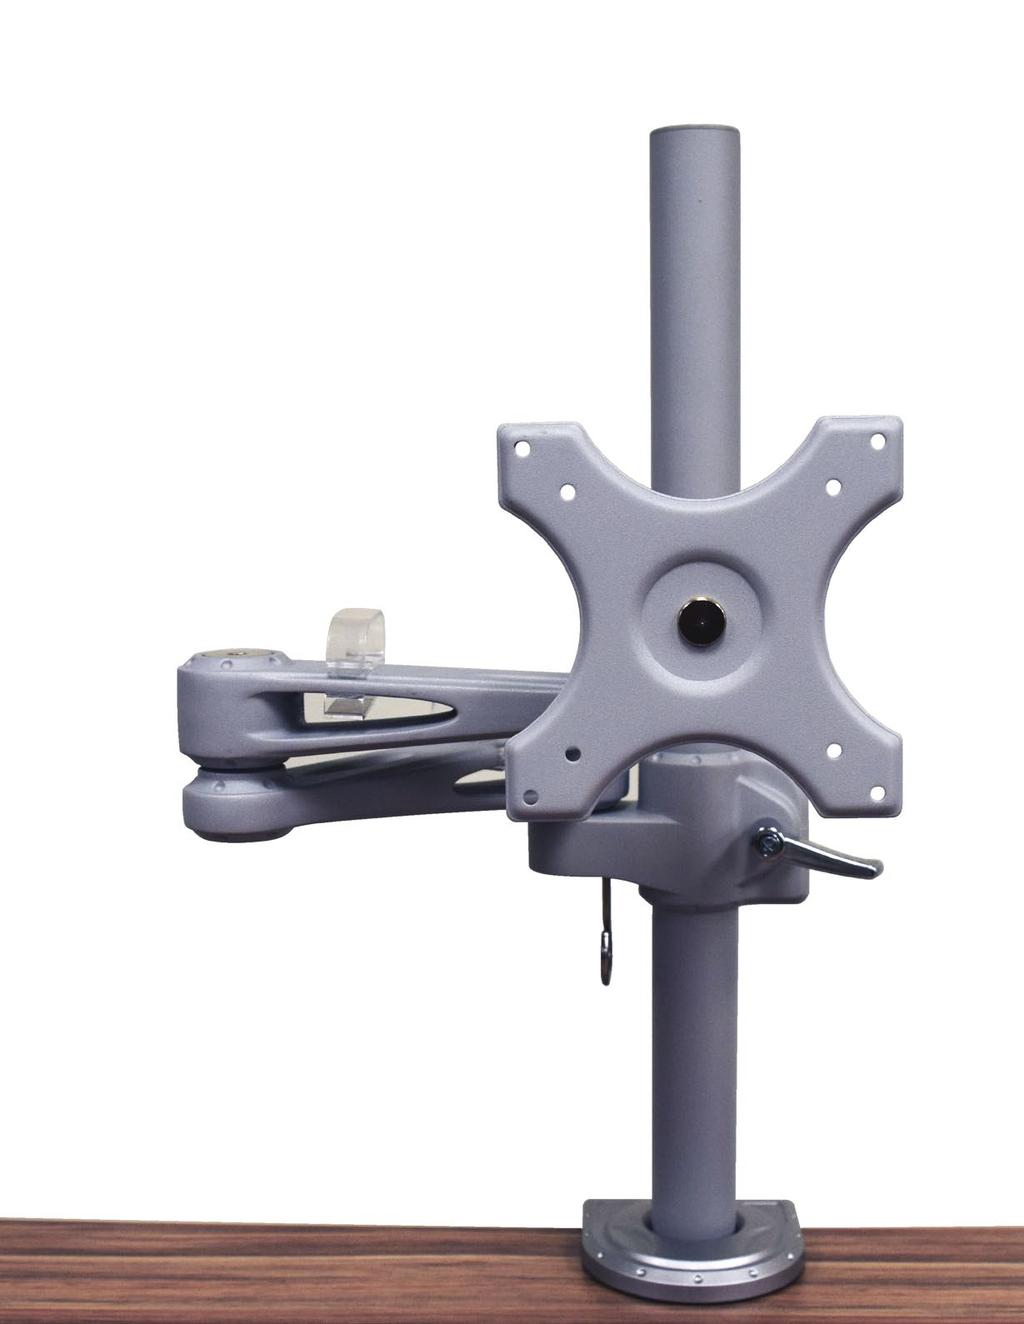 SINGLE MONITOR ARMS Clamp Mount or Grommet Mount Options (Must be specified separately) Our